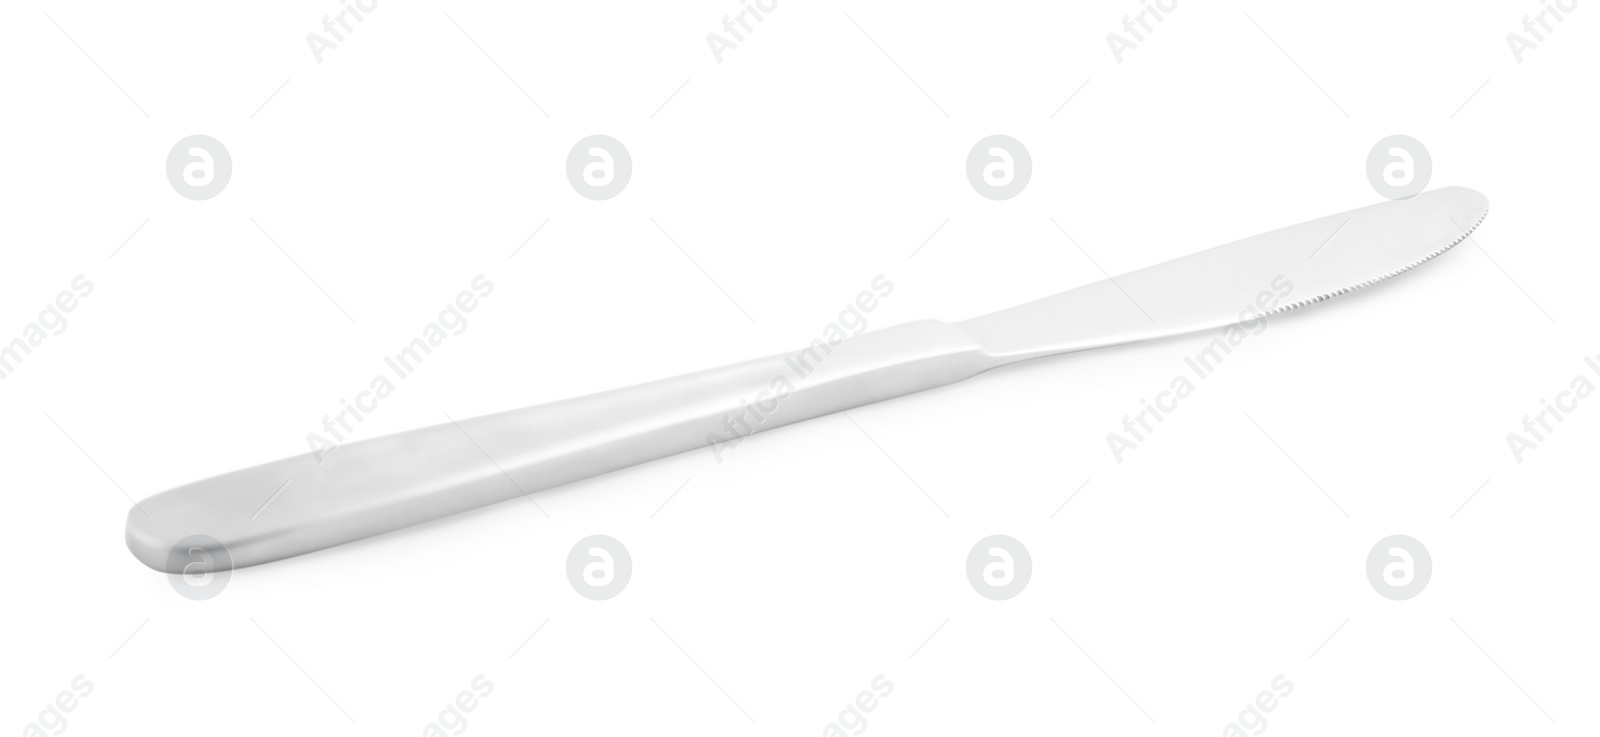 Photo of New clean shiny knife isolated on white